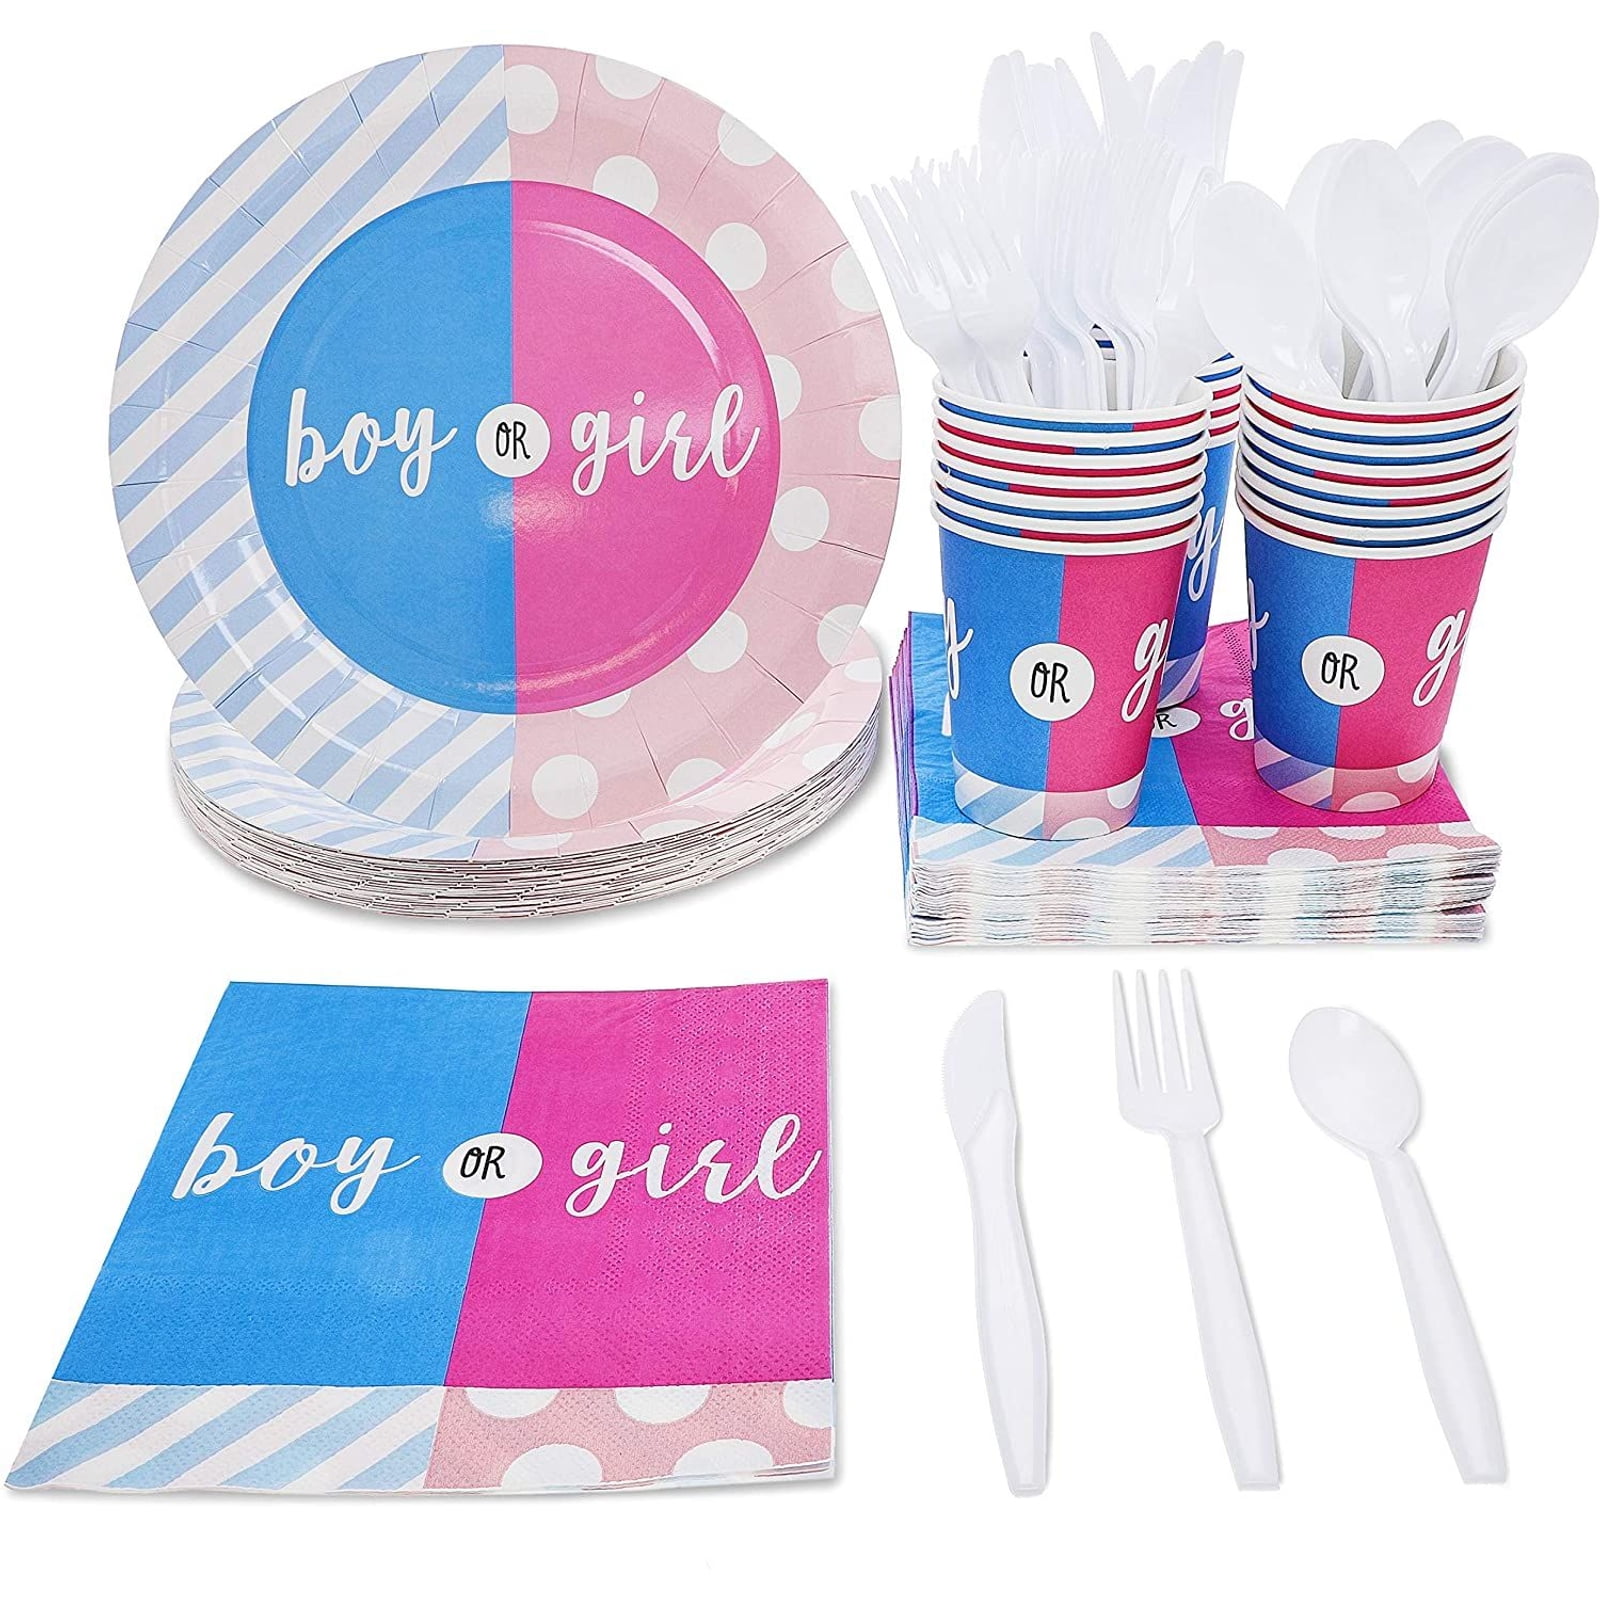 Boy Girl Gender Reveal Baby Shower Party Supplies Tableware Decorations Girl Boy 